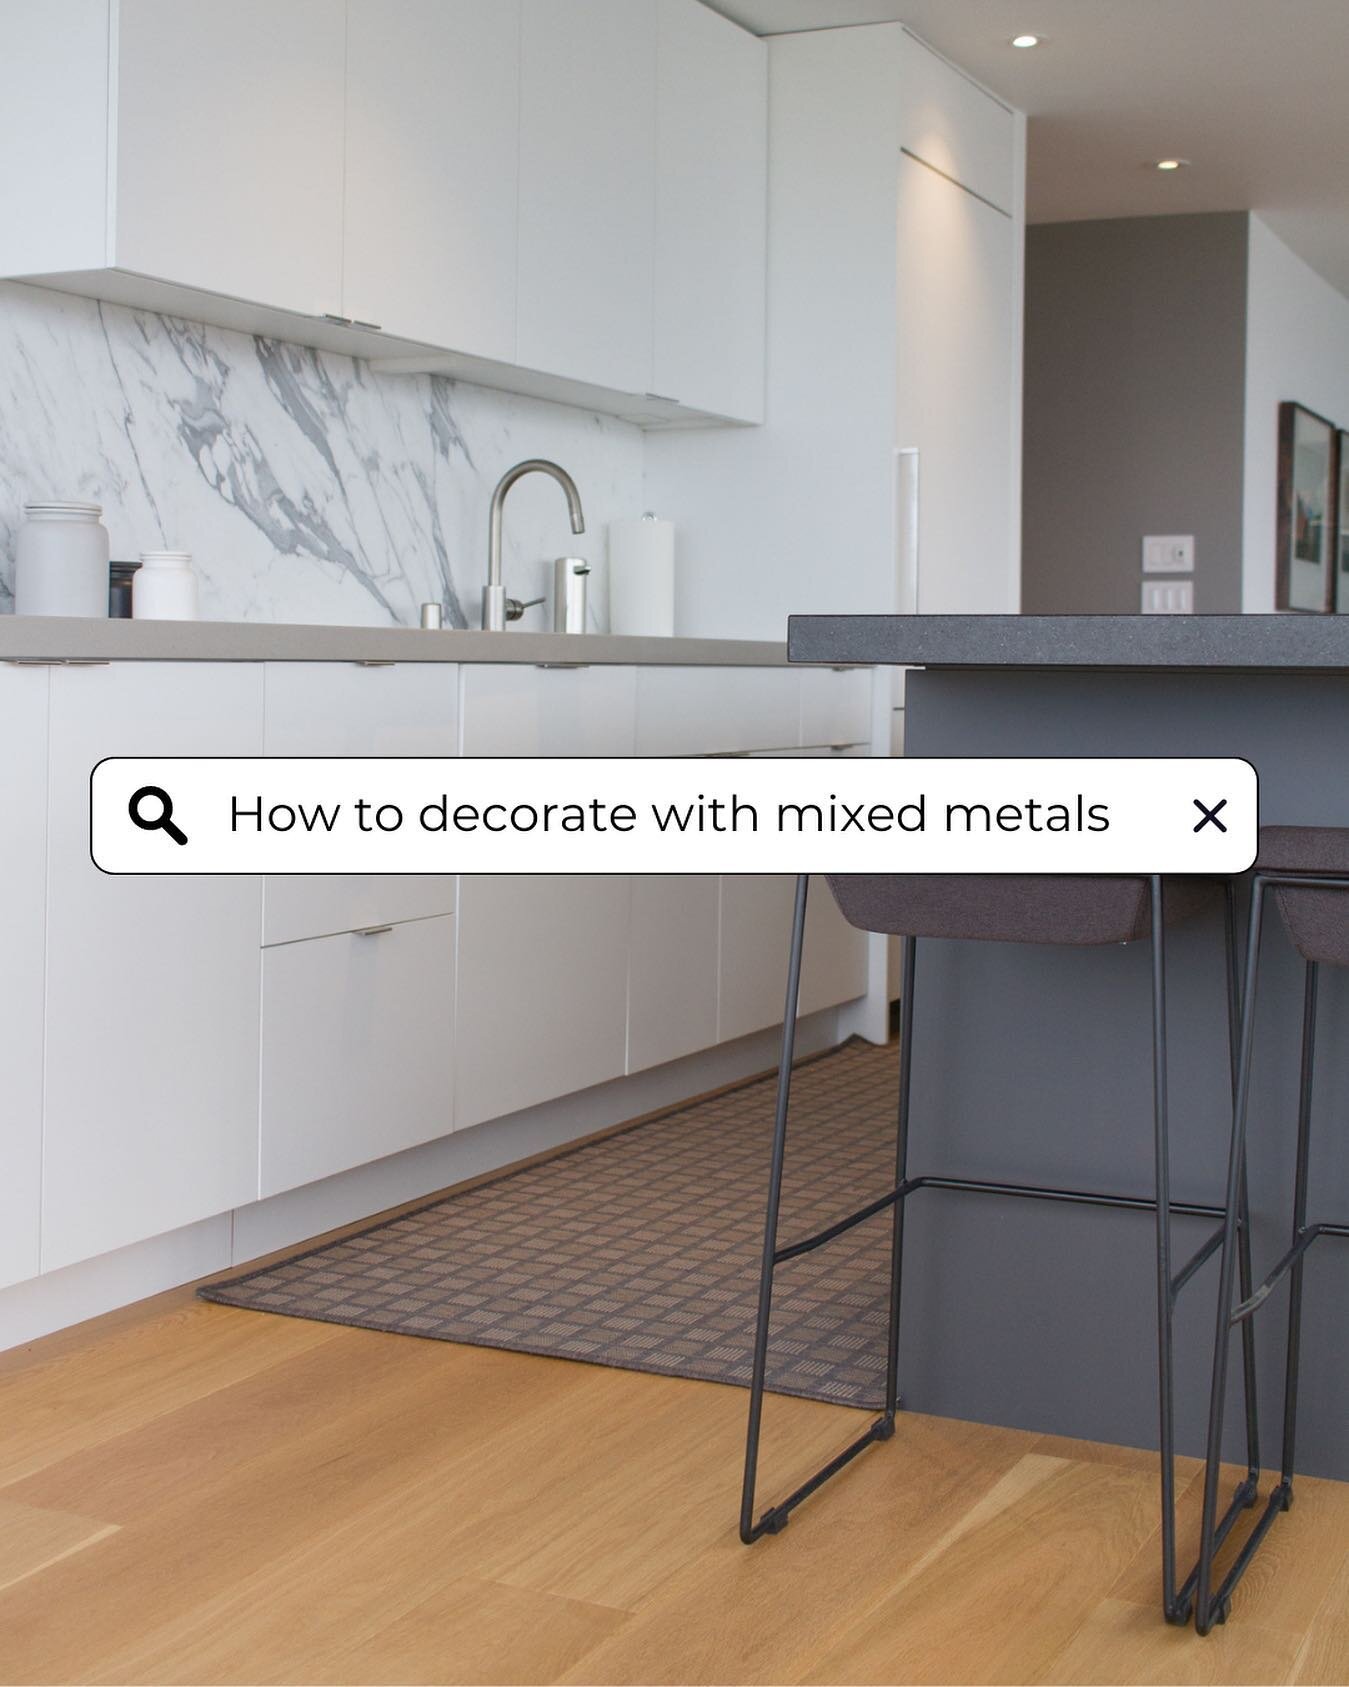 Decorating with mixed metals doesn&rsquo;t have to be a &ldquo;Design Don&rsquo;t&rdquo; when you follow a few simple guidelines:

⚡️ Stick to 2 different metals in smaller spaces like a laundry room or powder room

⚡️ If your space is larger, like a